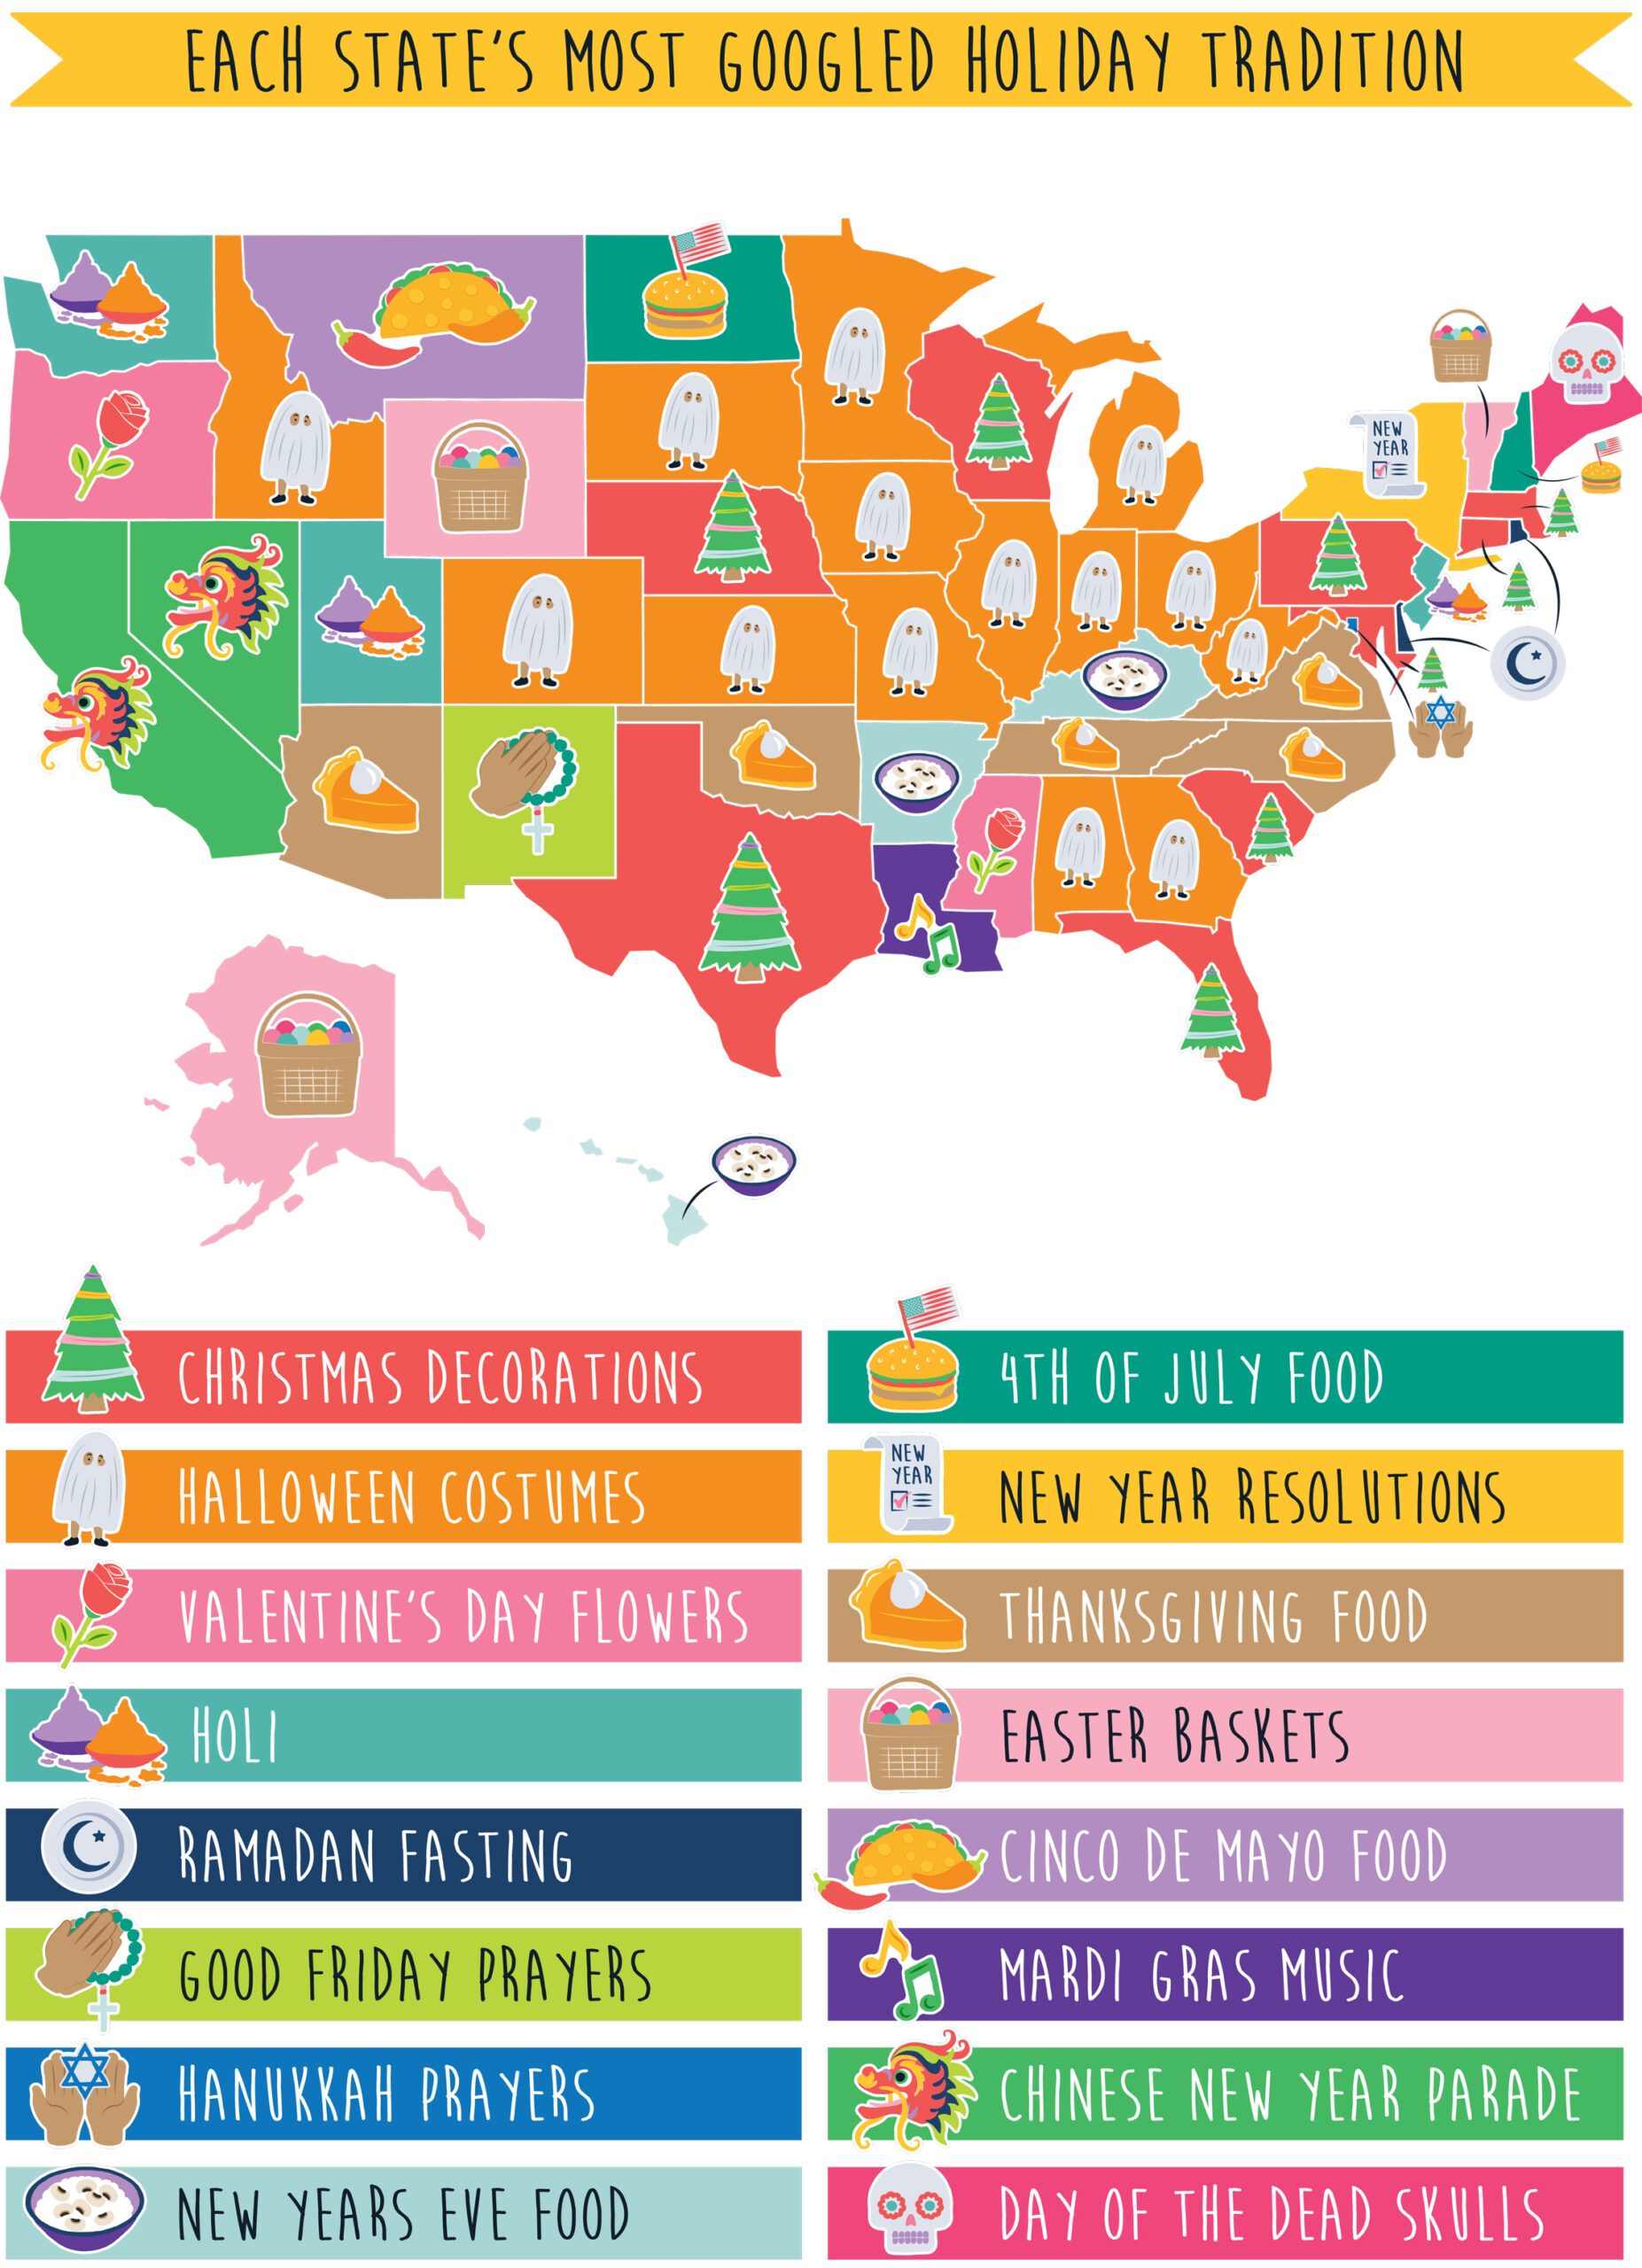 The Most Googled Holiday Tradition in Each State